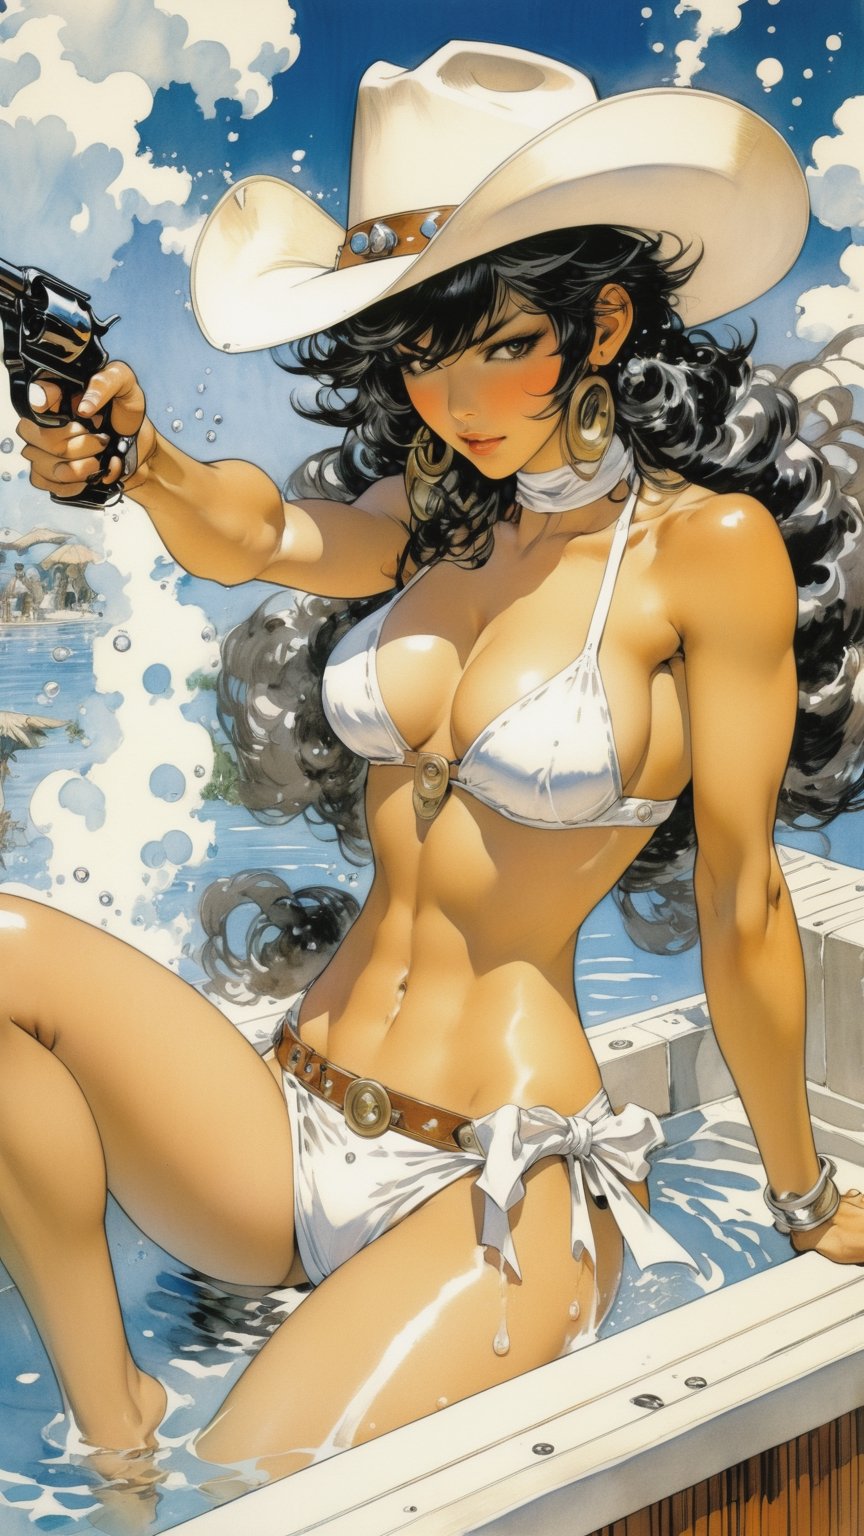 Anime artwork. Cowgirl,  Asian,  pointing with a gun,  splashing in a hot tub outdoor,  white bikini,  white cowboy hat,  art by Masamune Shirow,  art by J.C. Leyendecker,  anime style,  key visual,  vibrant,  studio anime,  highly detailed